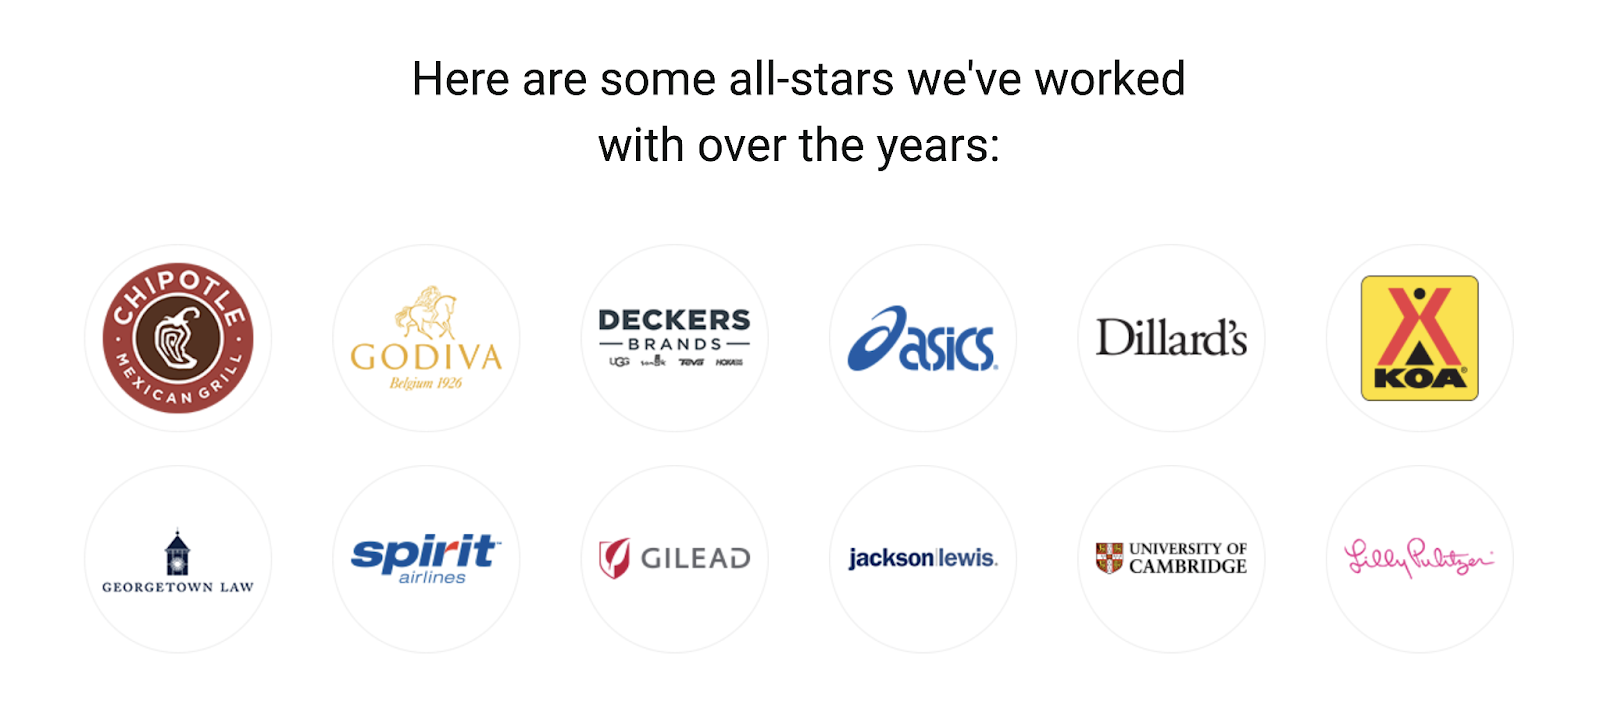 A subheading "Here are some of the all-stars we've worked with over the years:" above logos from various brands, such as Chipotle and Godiva.